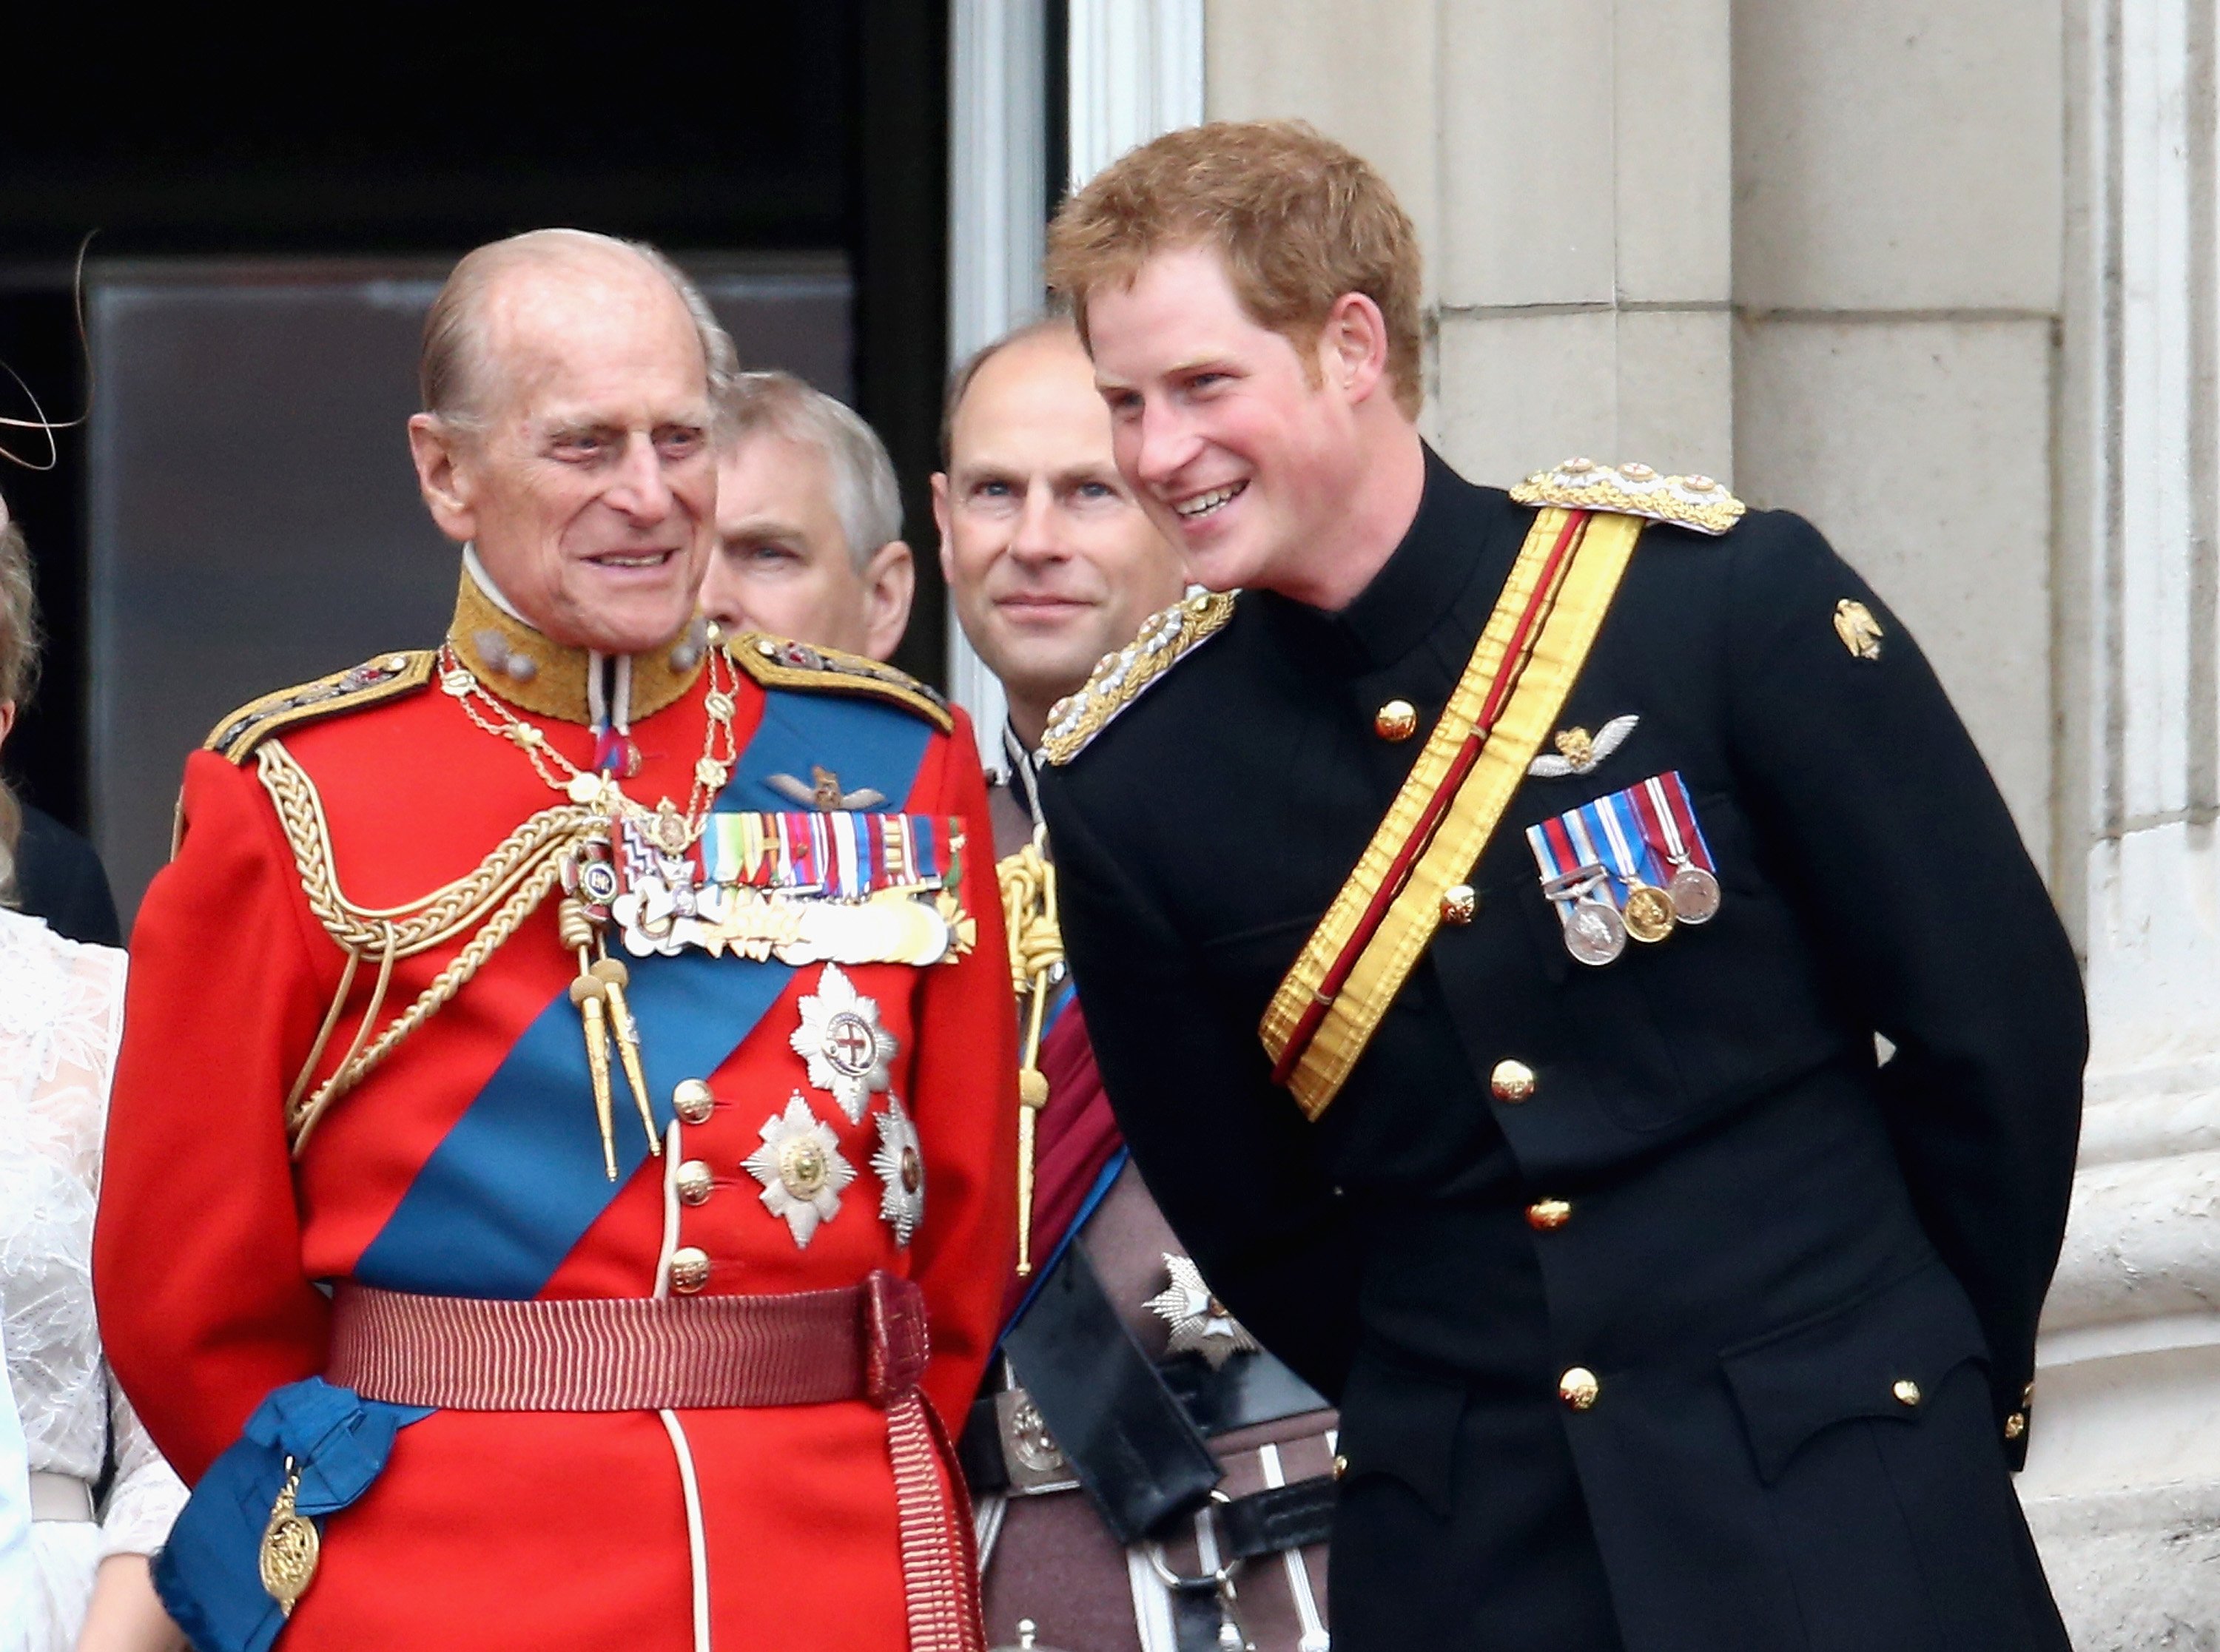 Prince Harry and Prince Philip, Duke of Edinburgh share a joke on the balcony during Trooping the Color - Queen Elizabeth II's Birthday Parade, at The Royal Horseguards on June 14, 2014 in London, England | Source: Getty Images